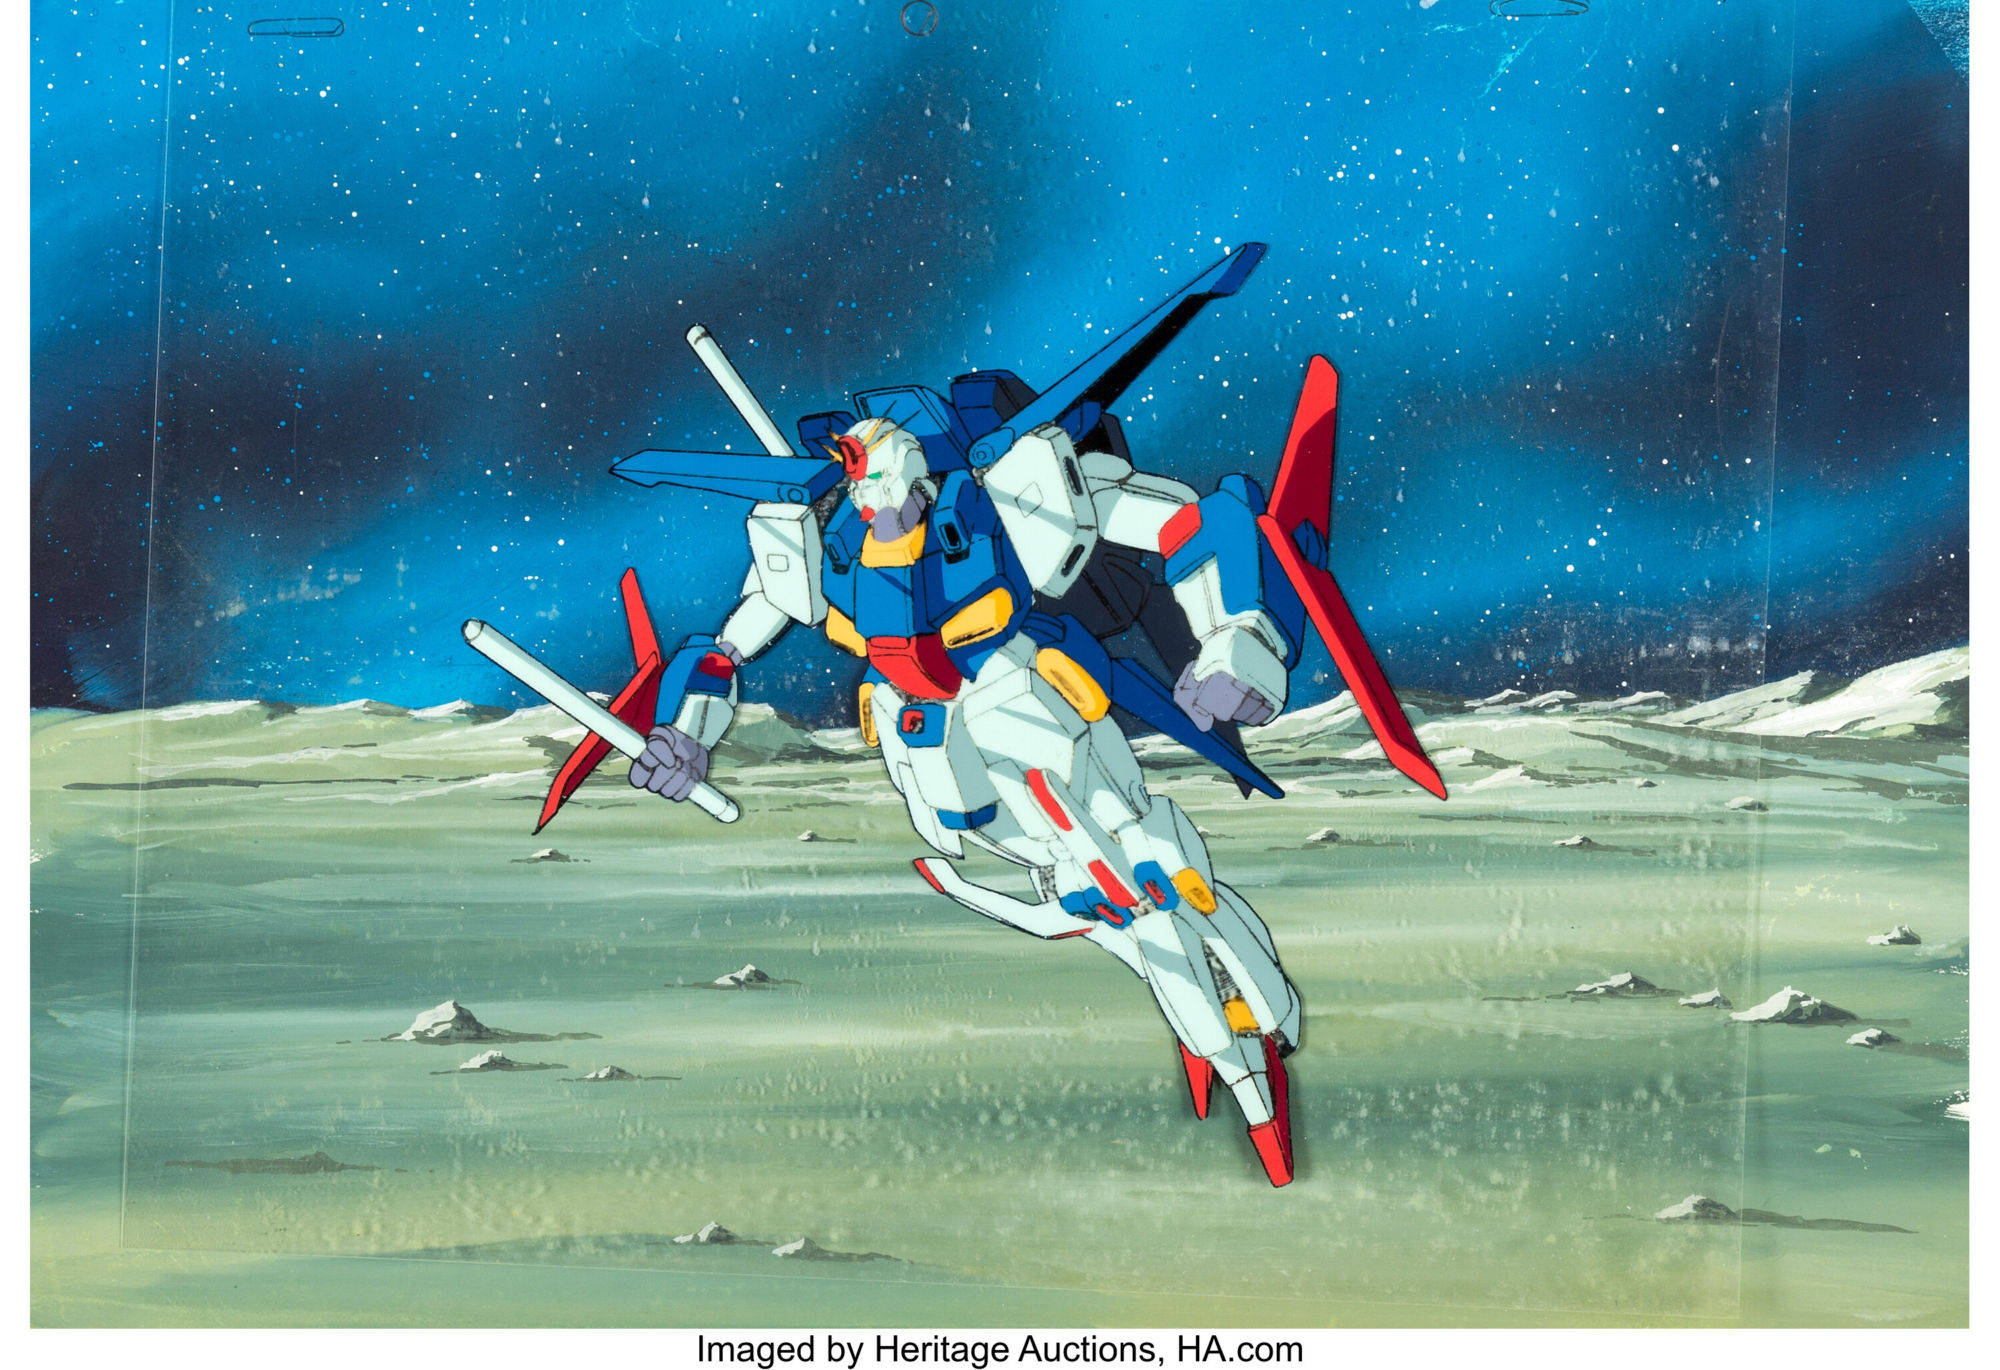 Top 10 Essential Gundam Anime Shows to Watch